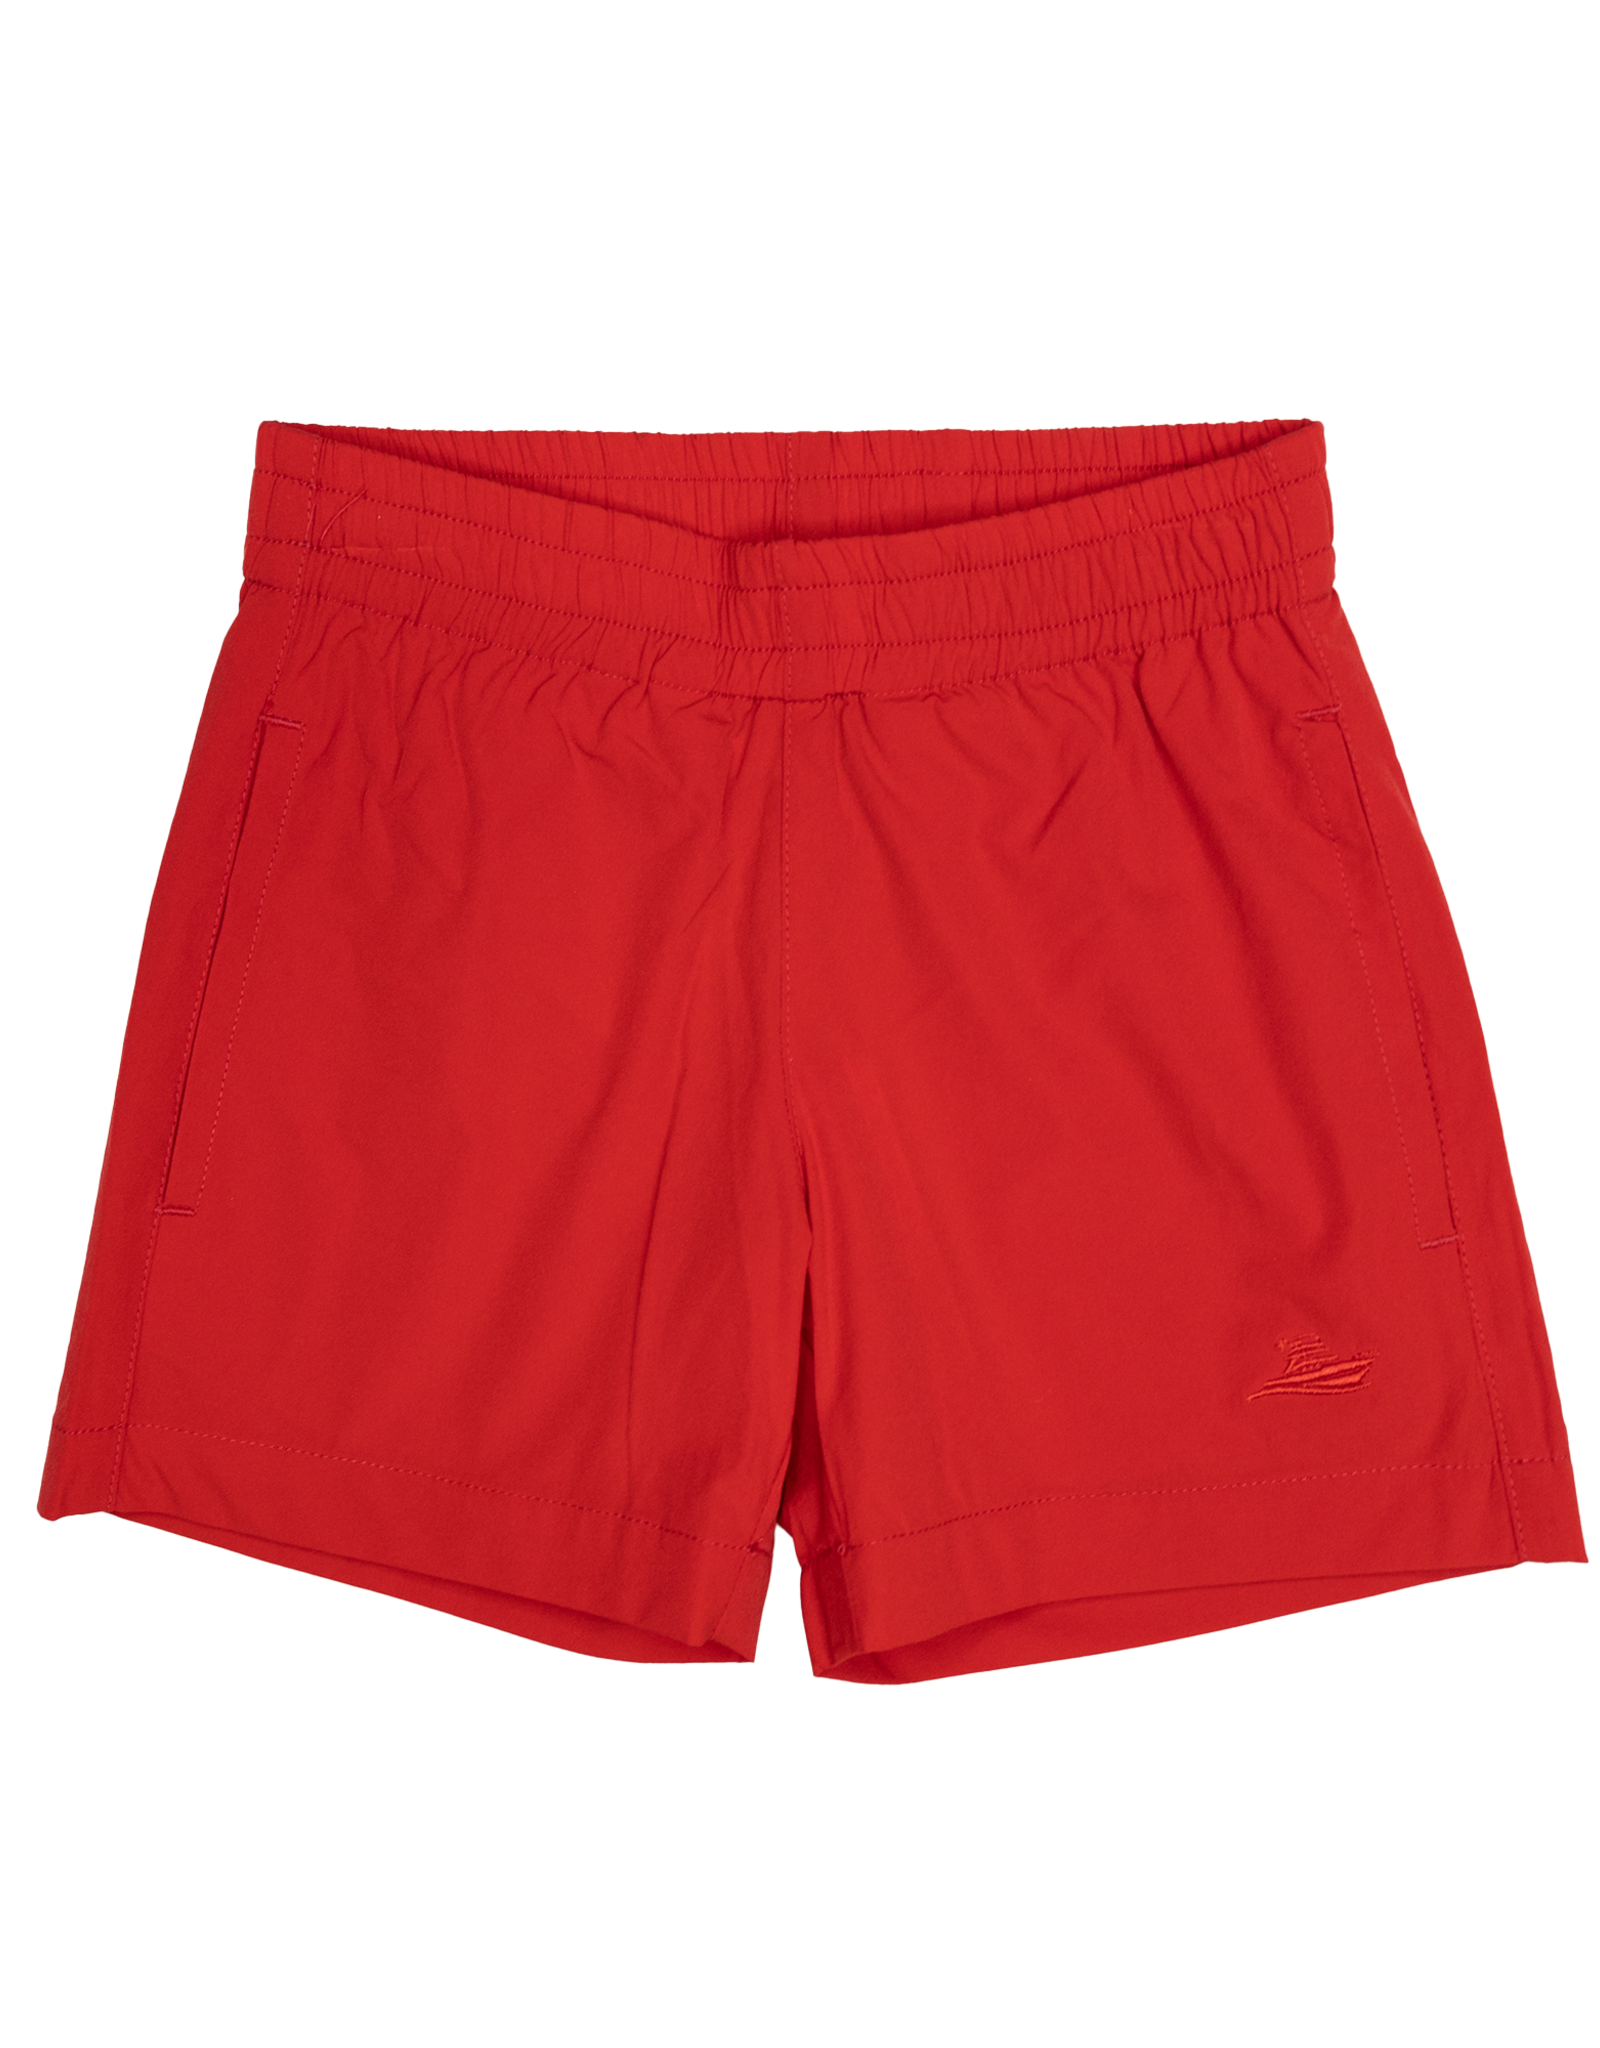 South Bound 3325 Performance Play Short Red